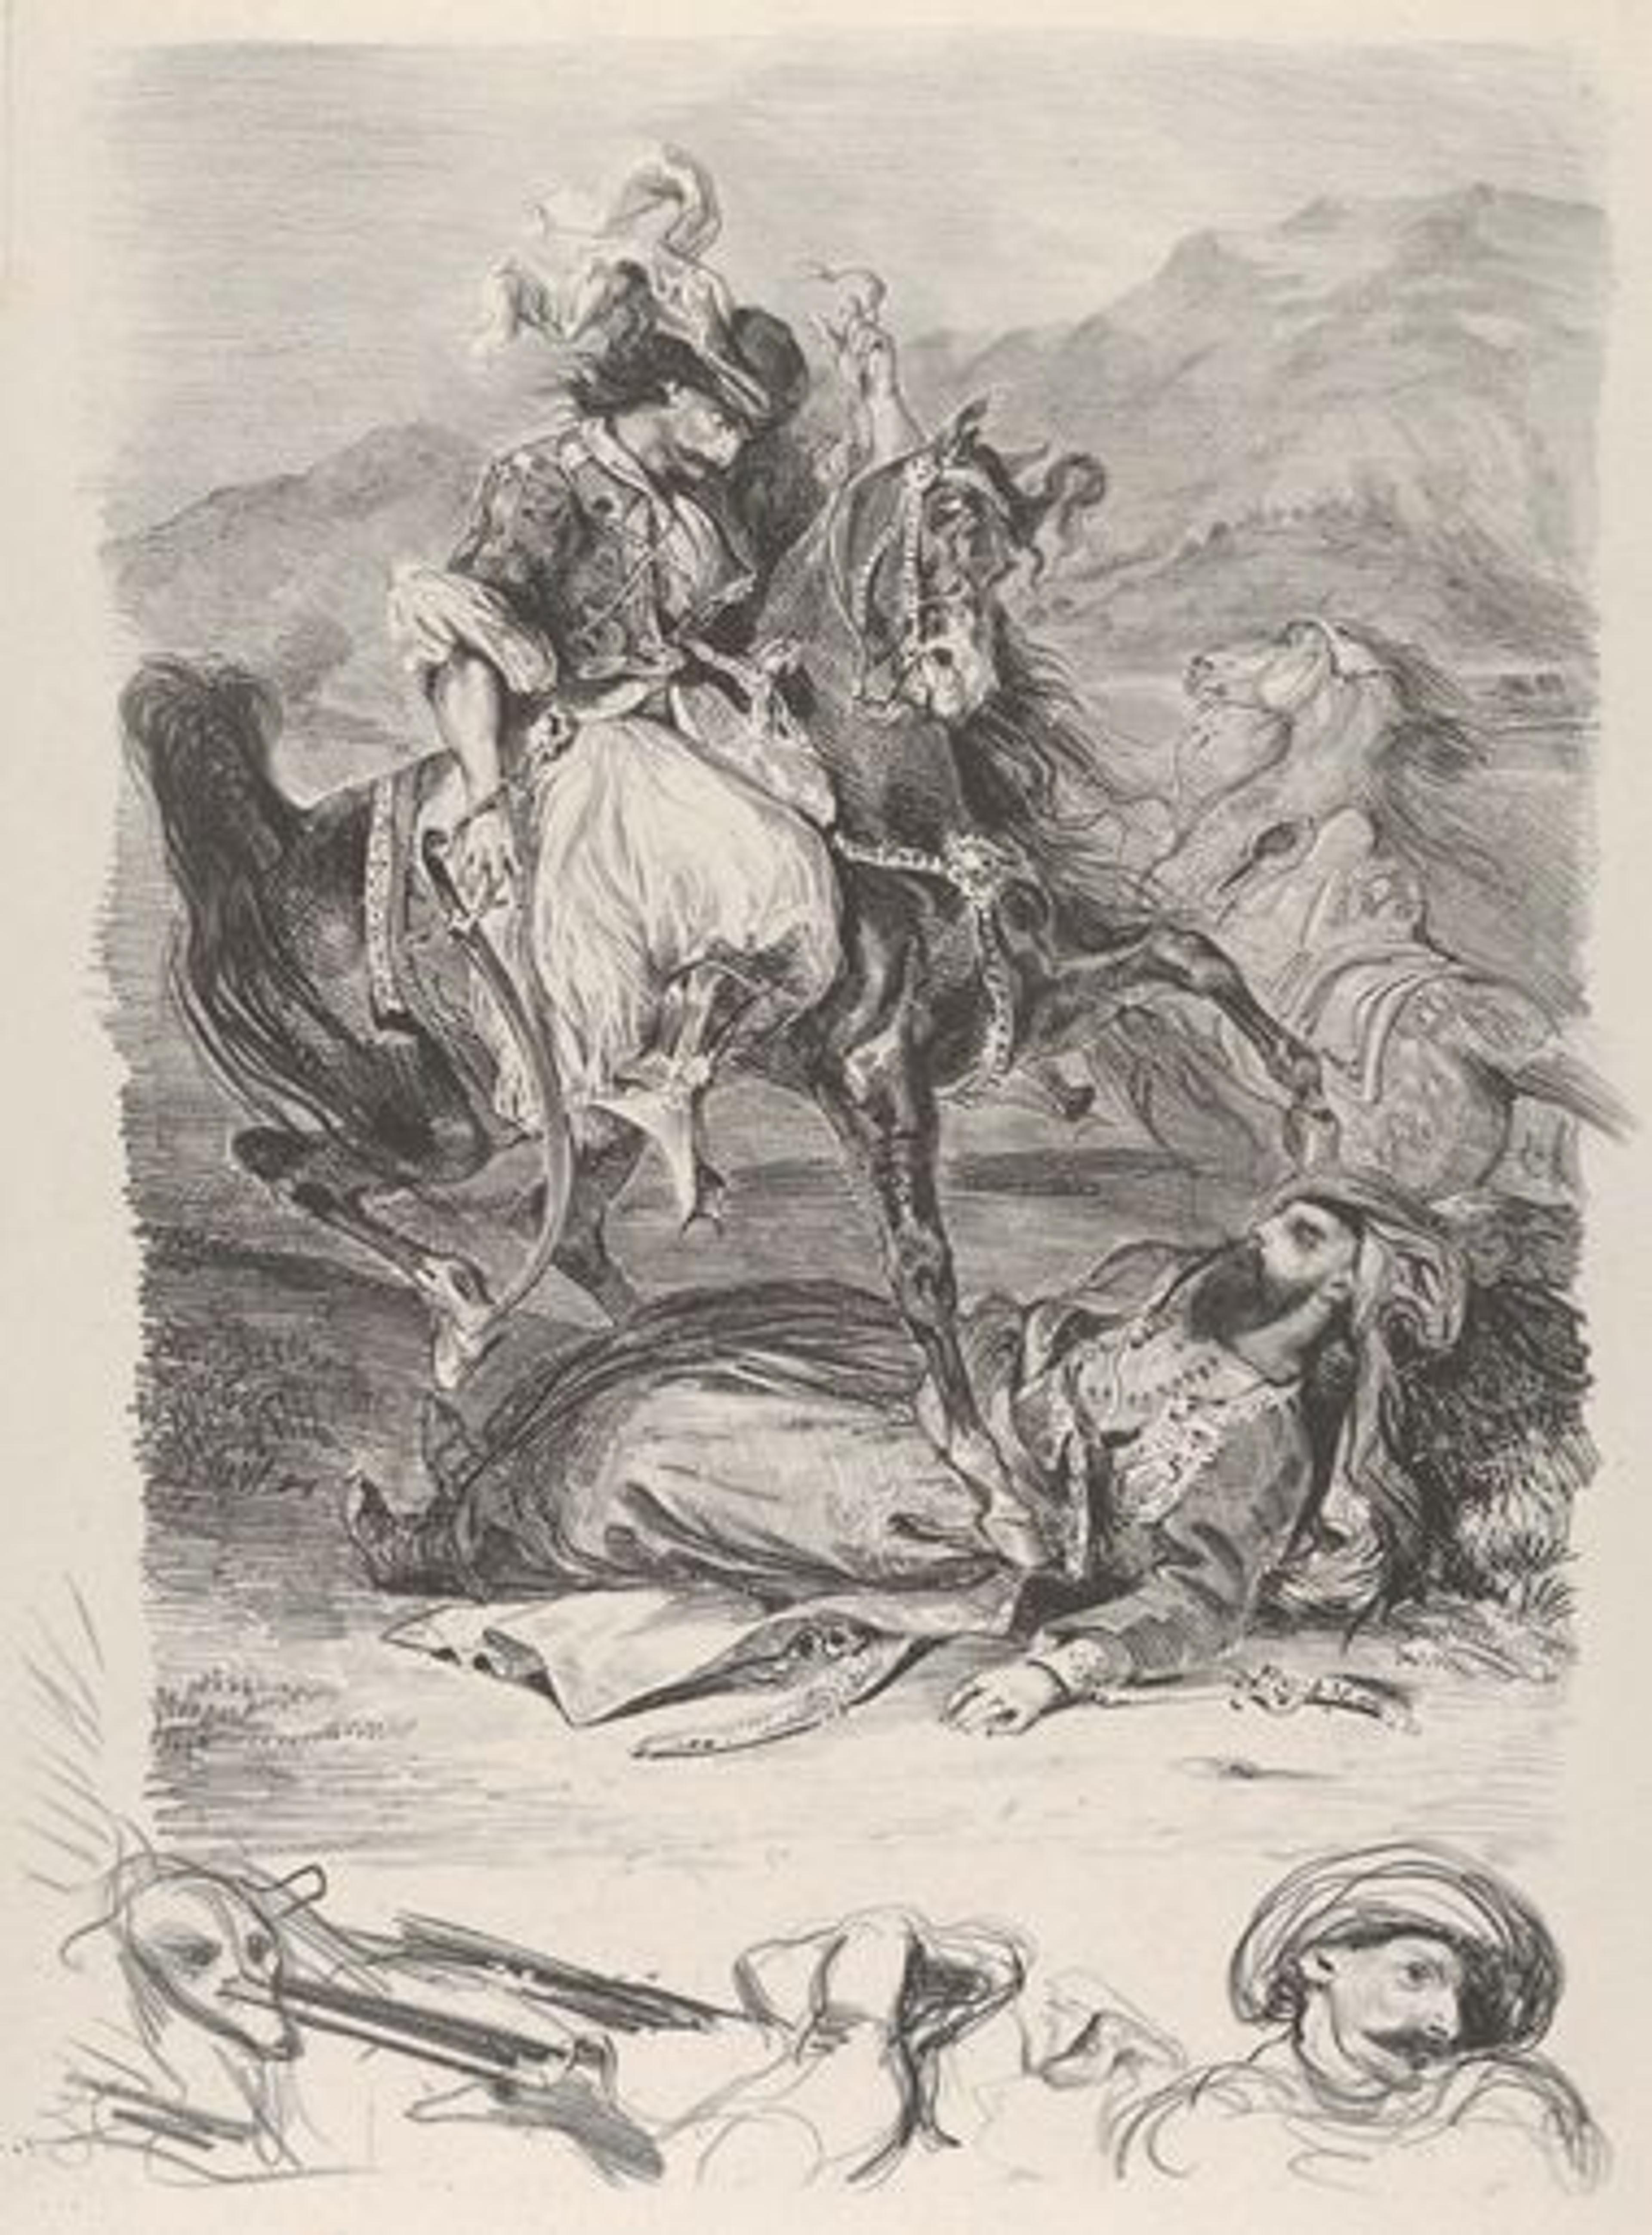 Lithograph by Eugene Delacroix of a Turkish giaour in battle with a pasha